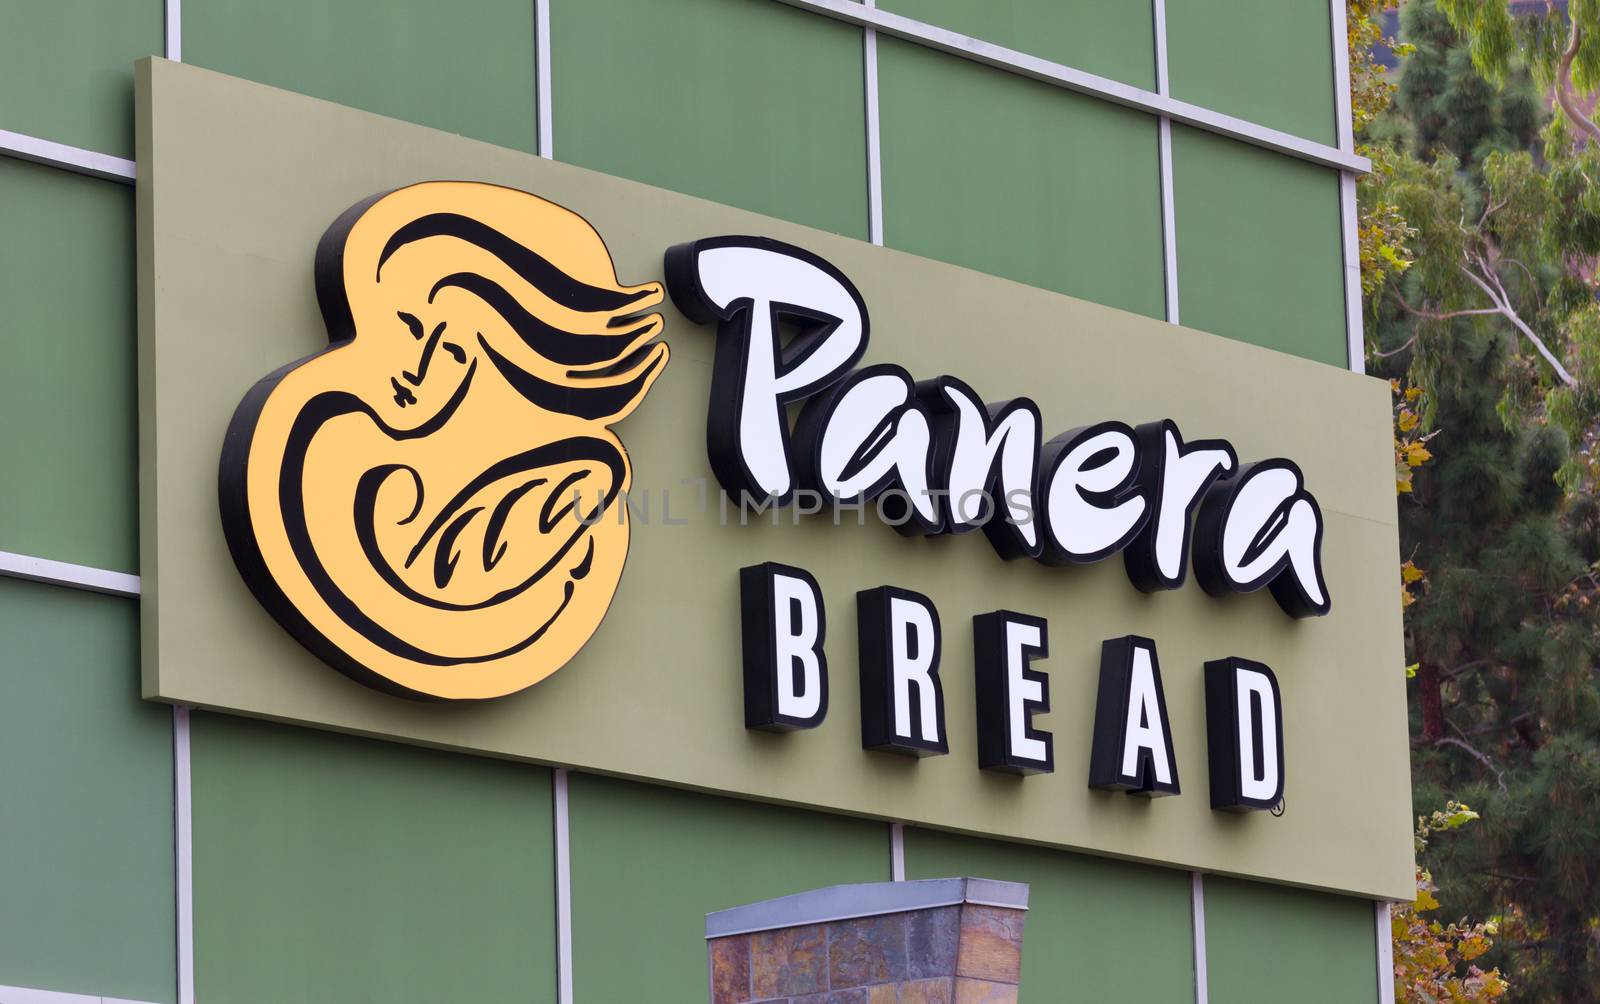 COSTA MESA, CA/USA - OCTOBER 17, 2015: Panera Bread restaurant exterior. Panera Bread is a chain of bakery-café fast casual restaurants in the United States and Canada.